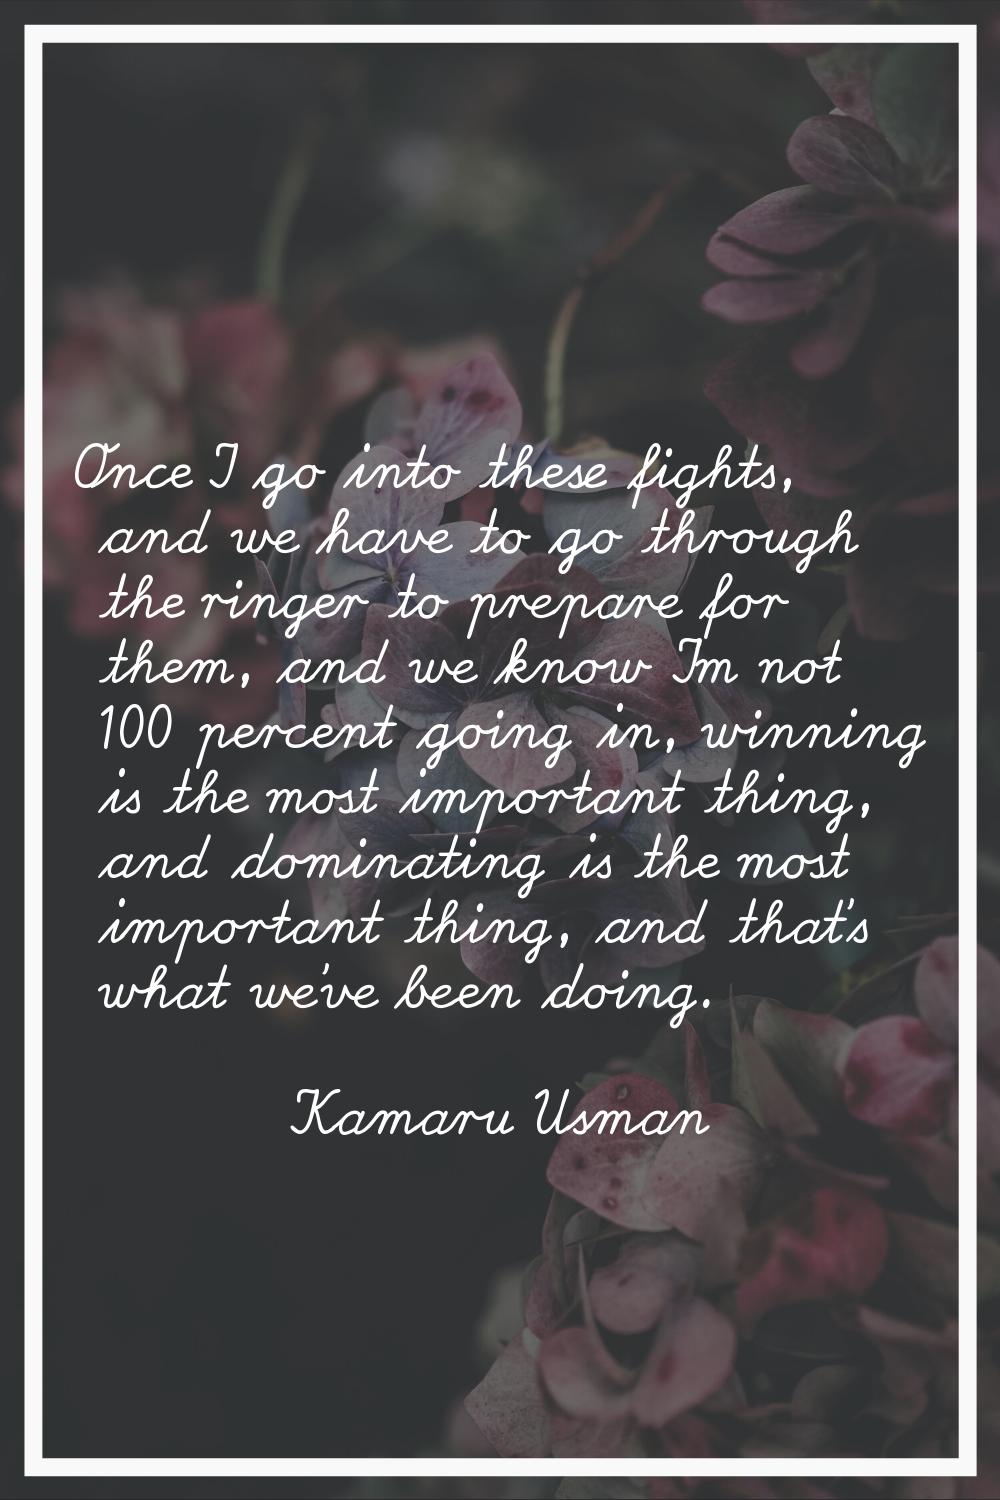 Once I go into these fights, and we have to go through the ringer to prepare for them, and we know 